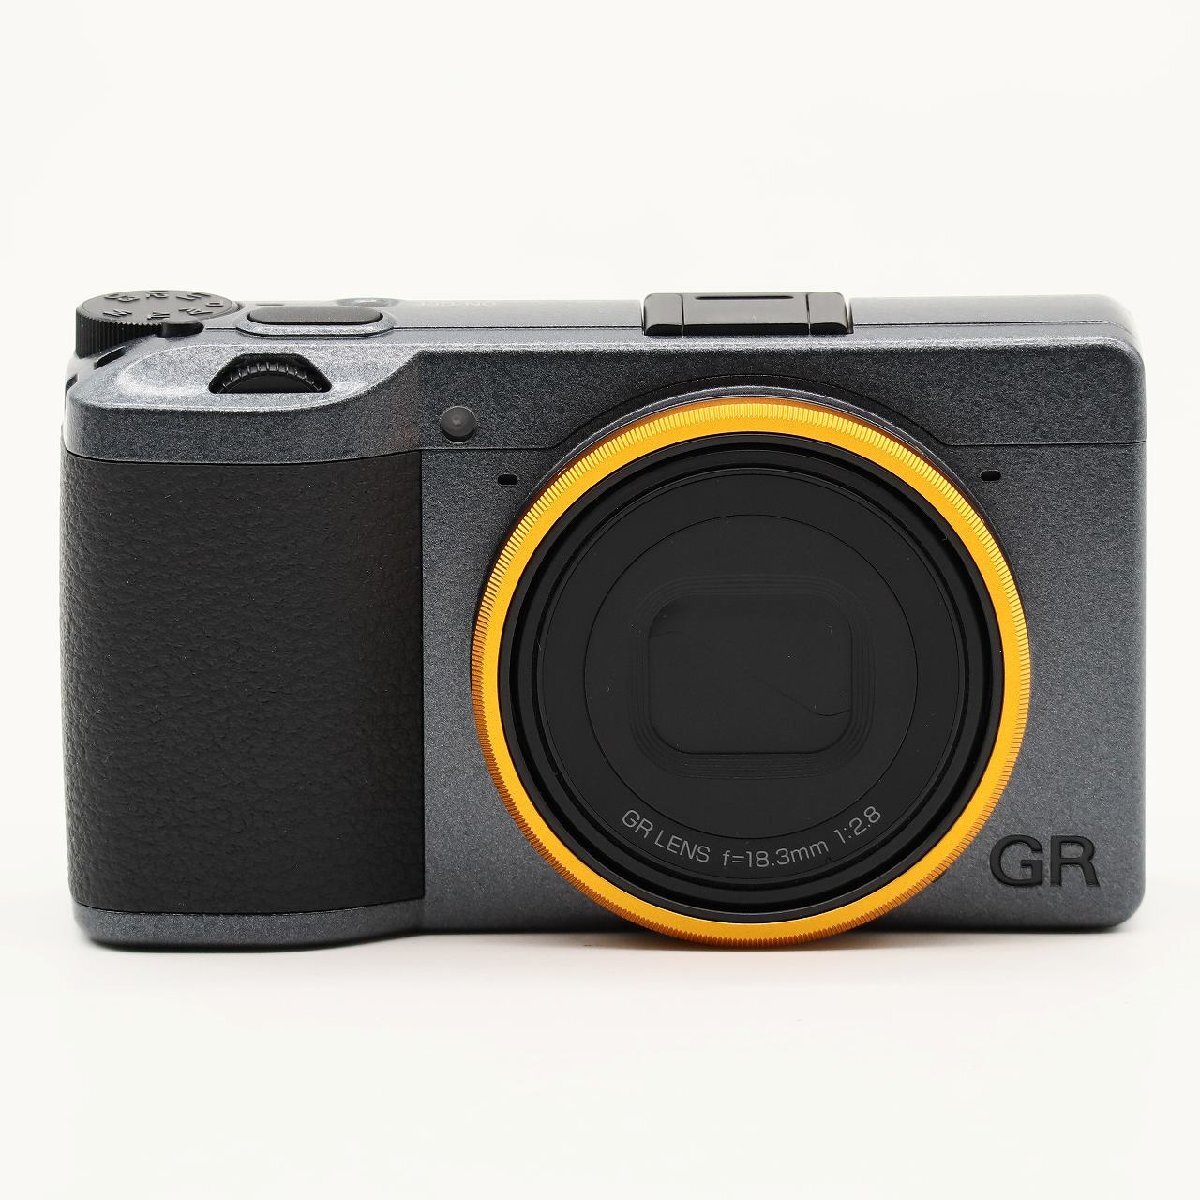  Ricoh RICOH GR III Street Edition Special Limited Kit